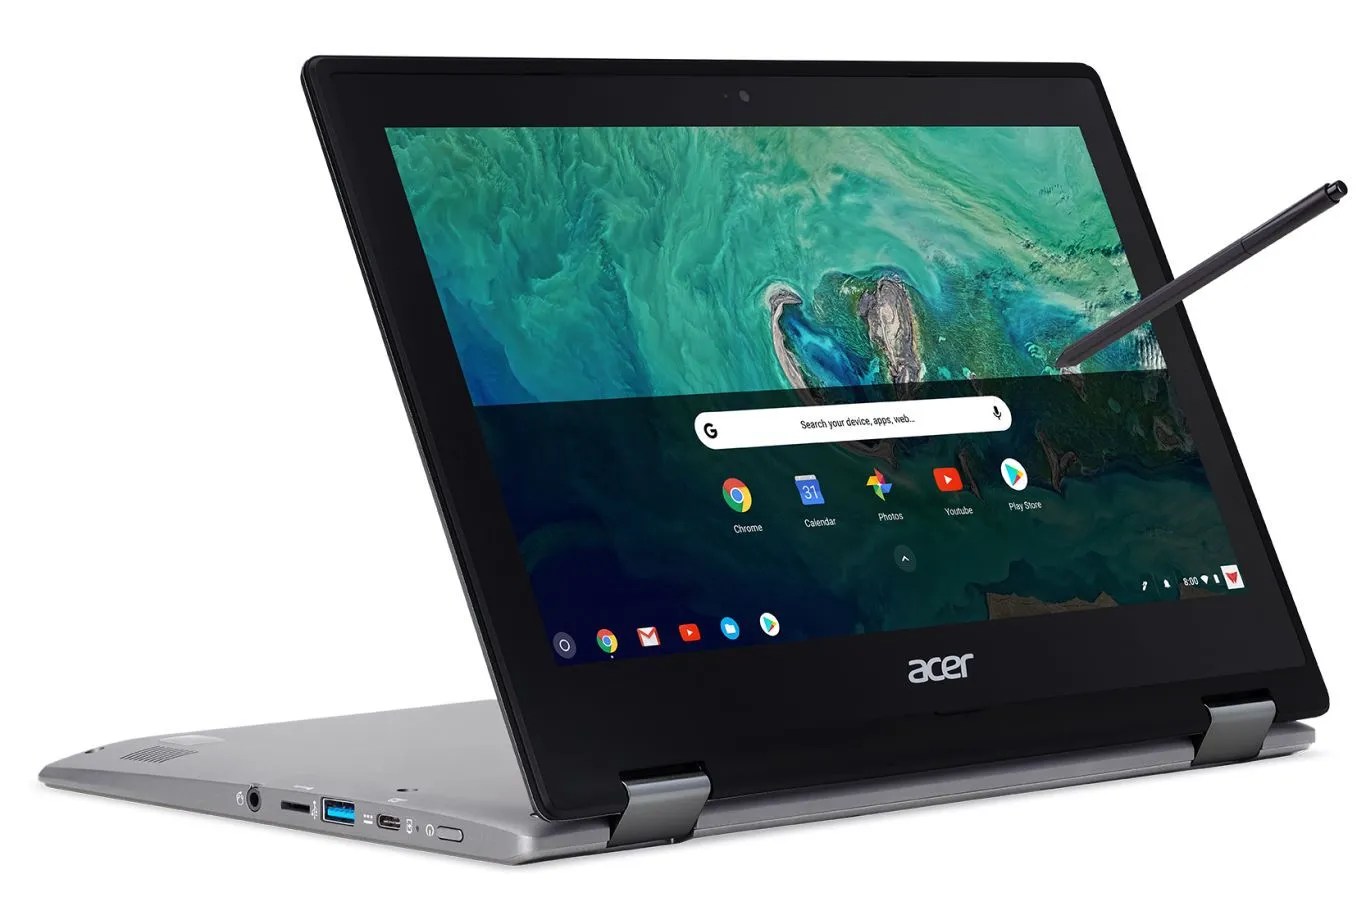 How To Fix Chrome OS Is Missing Or Damaged on Your Chromebook